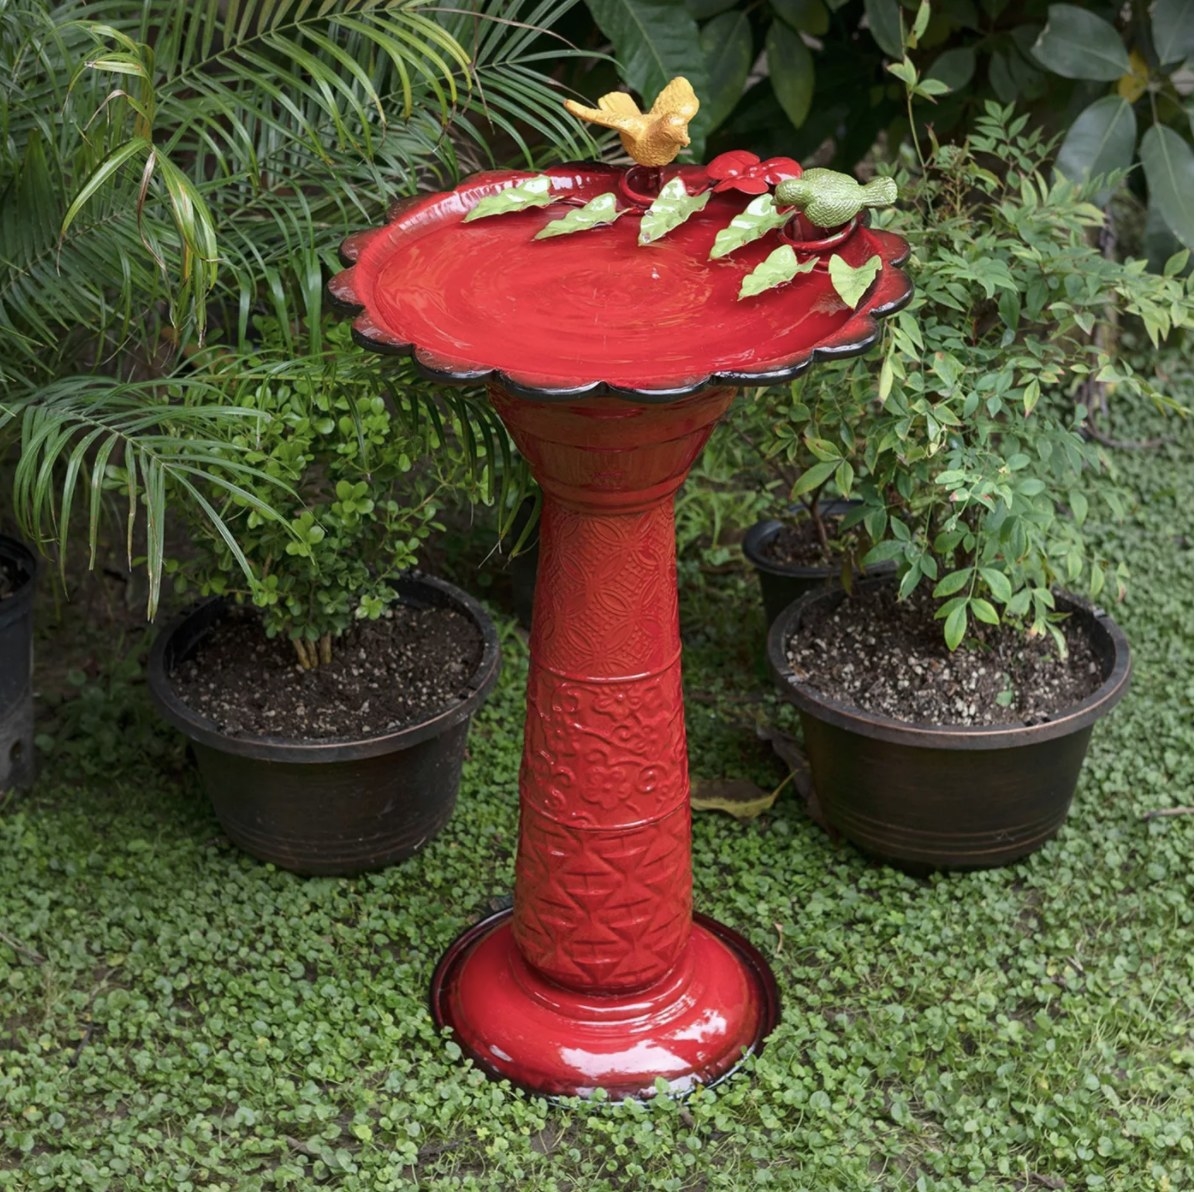 The bright red birdbath is outside surrounded by greenery and has two metal birds and some metal leaves on top 